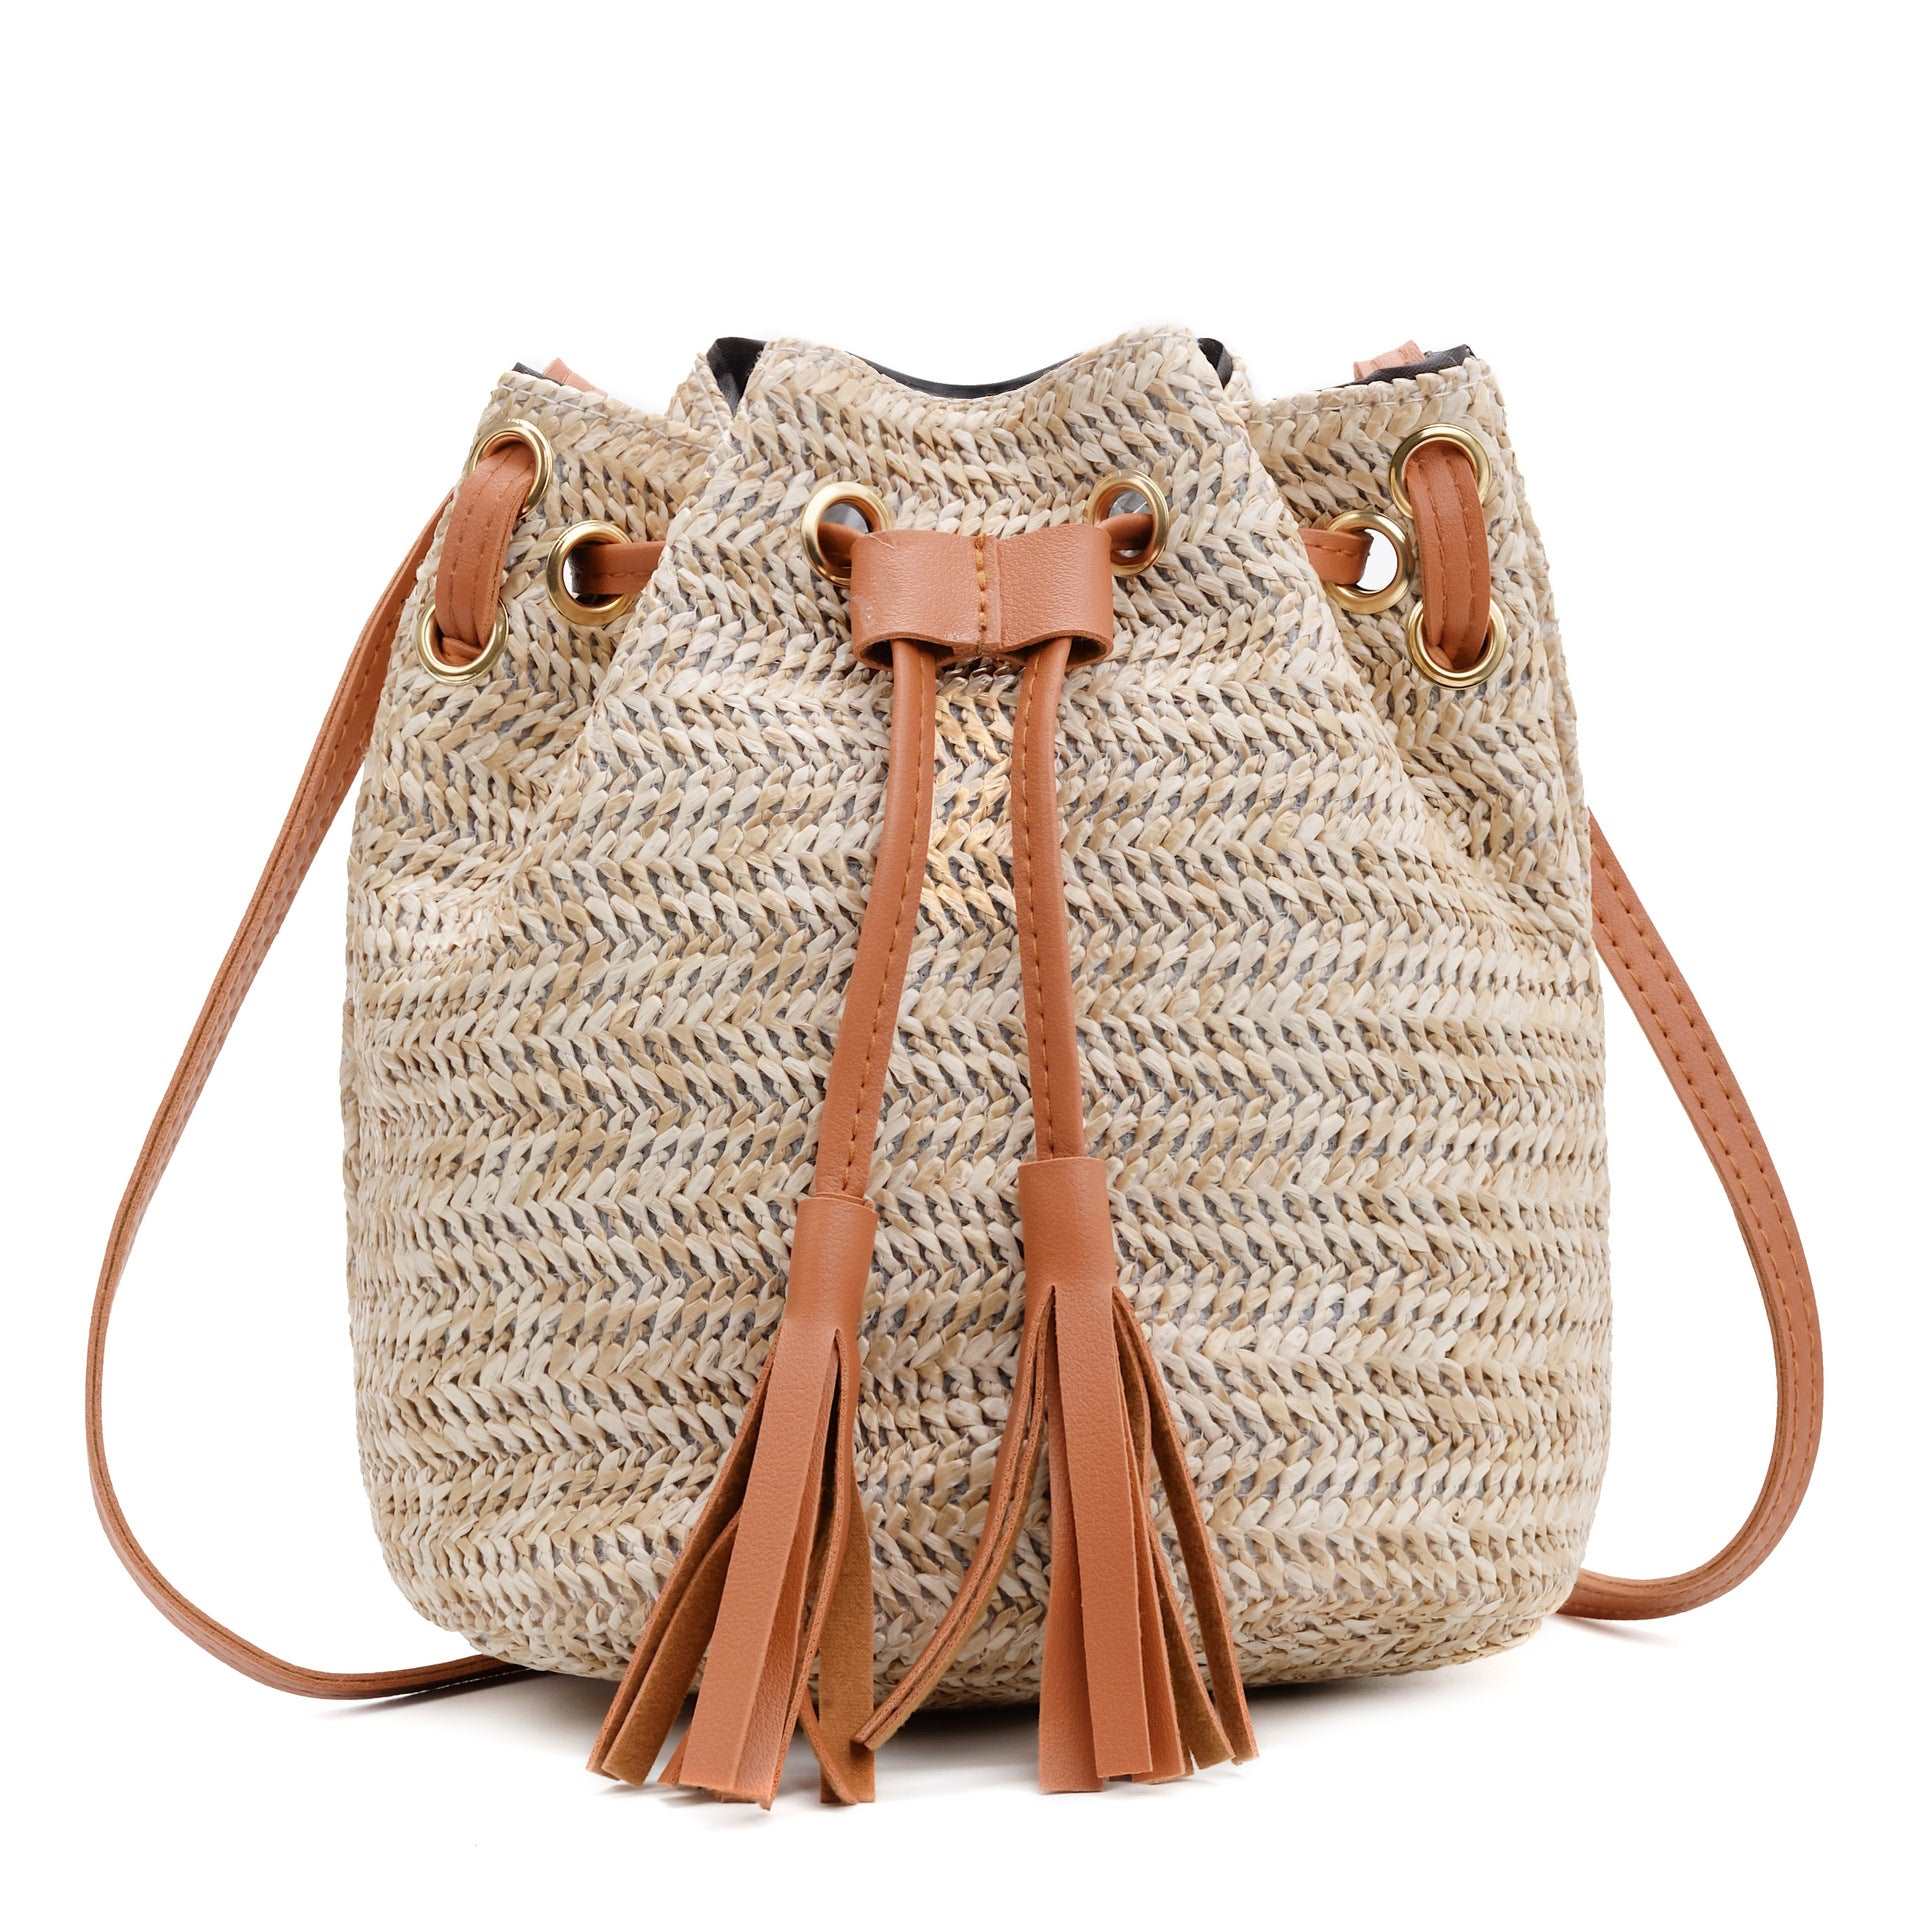 Holiday Beach Casual Woven Handbag with Leather Accents in Tan, Hot Pink, Pastel Pink - BELLADONNA